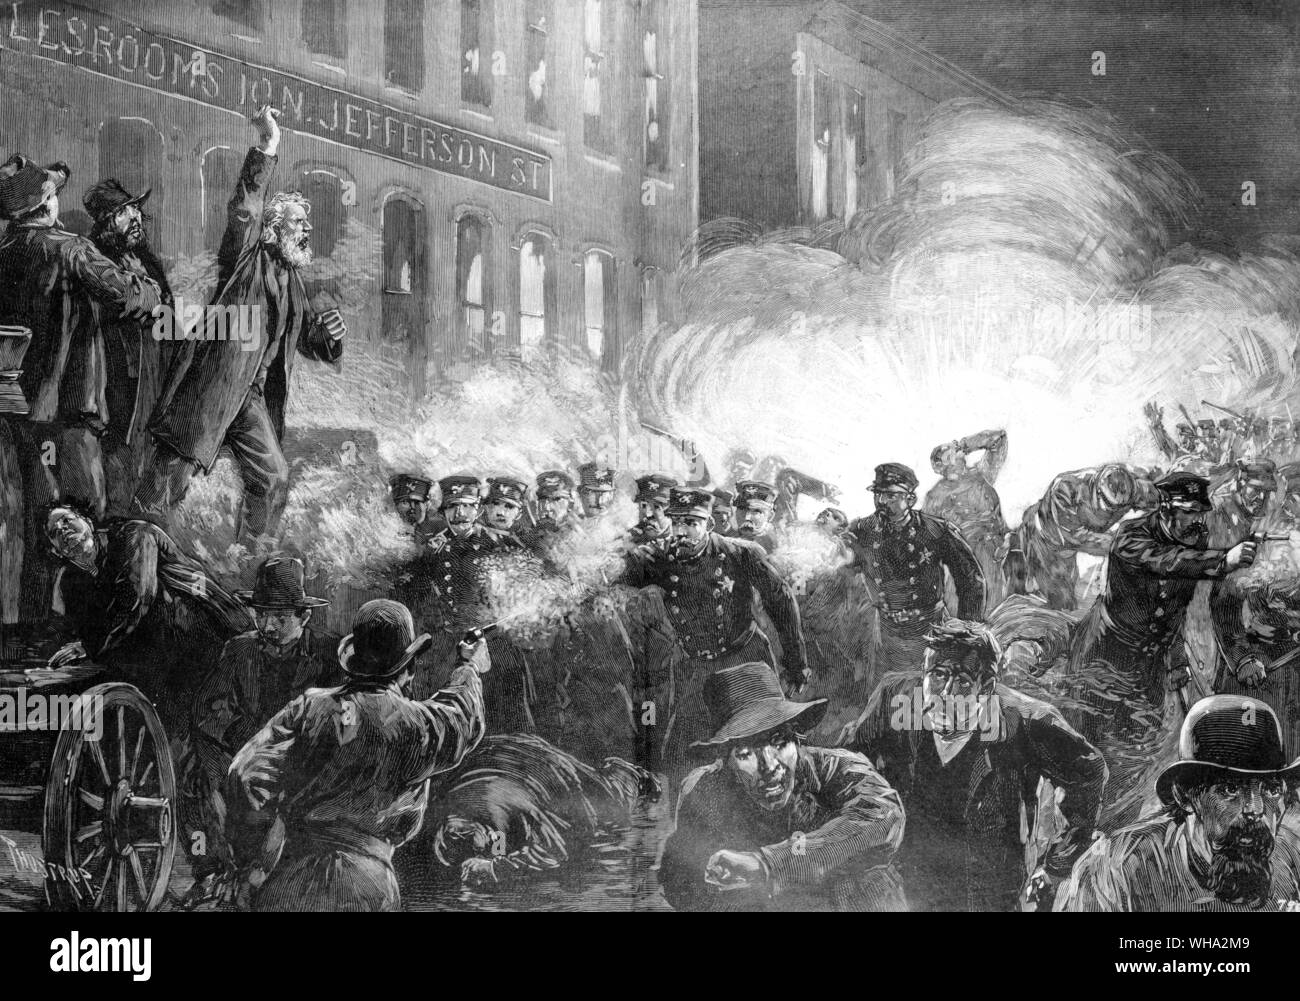 The anarchist riot in Haymarket Square, Chicago 1886 - A dynamite bomb exploding among the police.. . Engraving from Harpers Weekly May 15 1886 Stock Photo